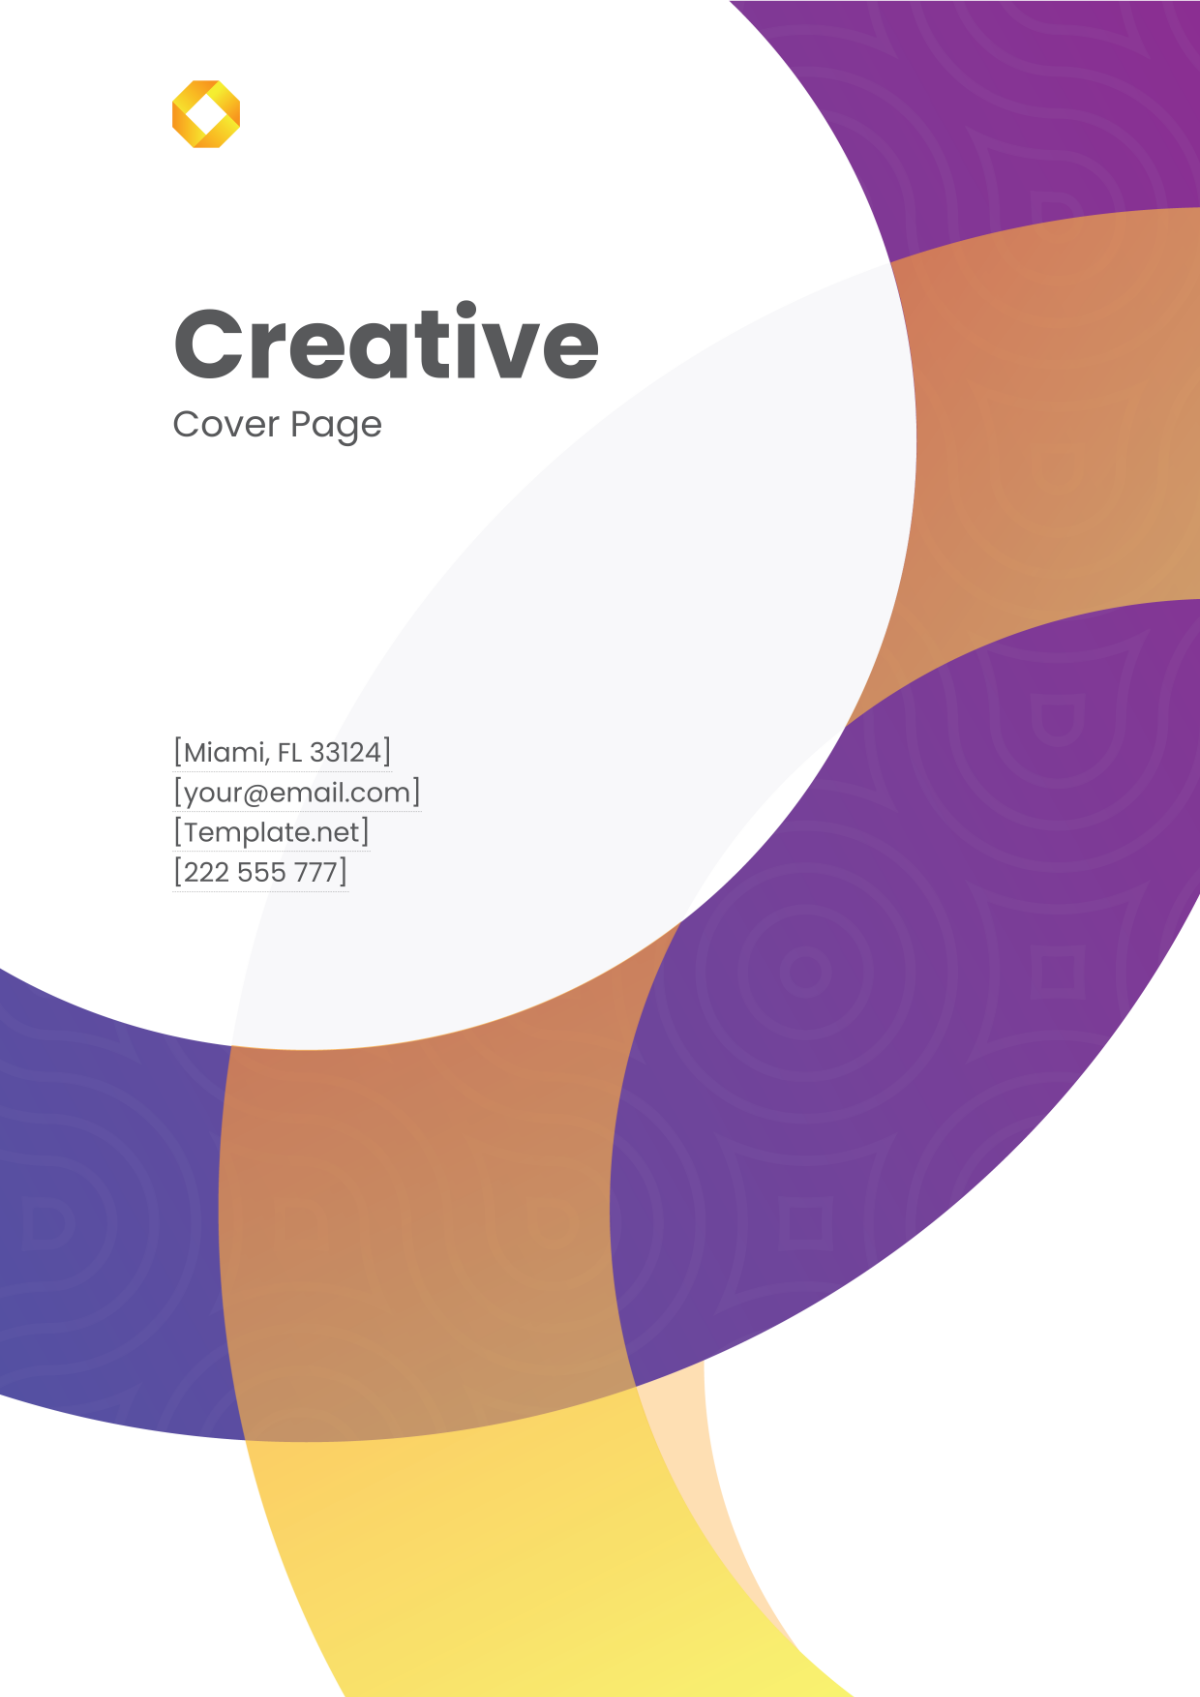 Creative Cover Page Logo Template